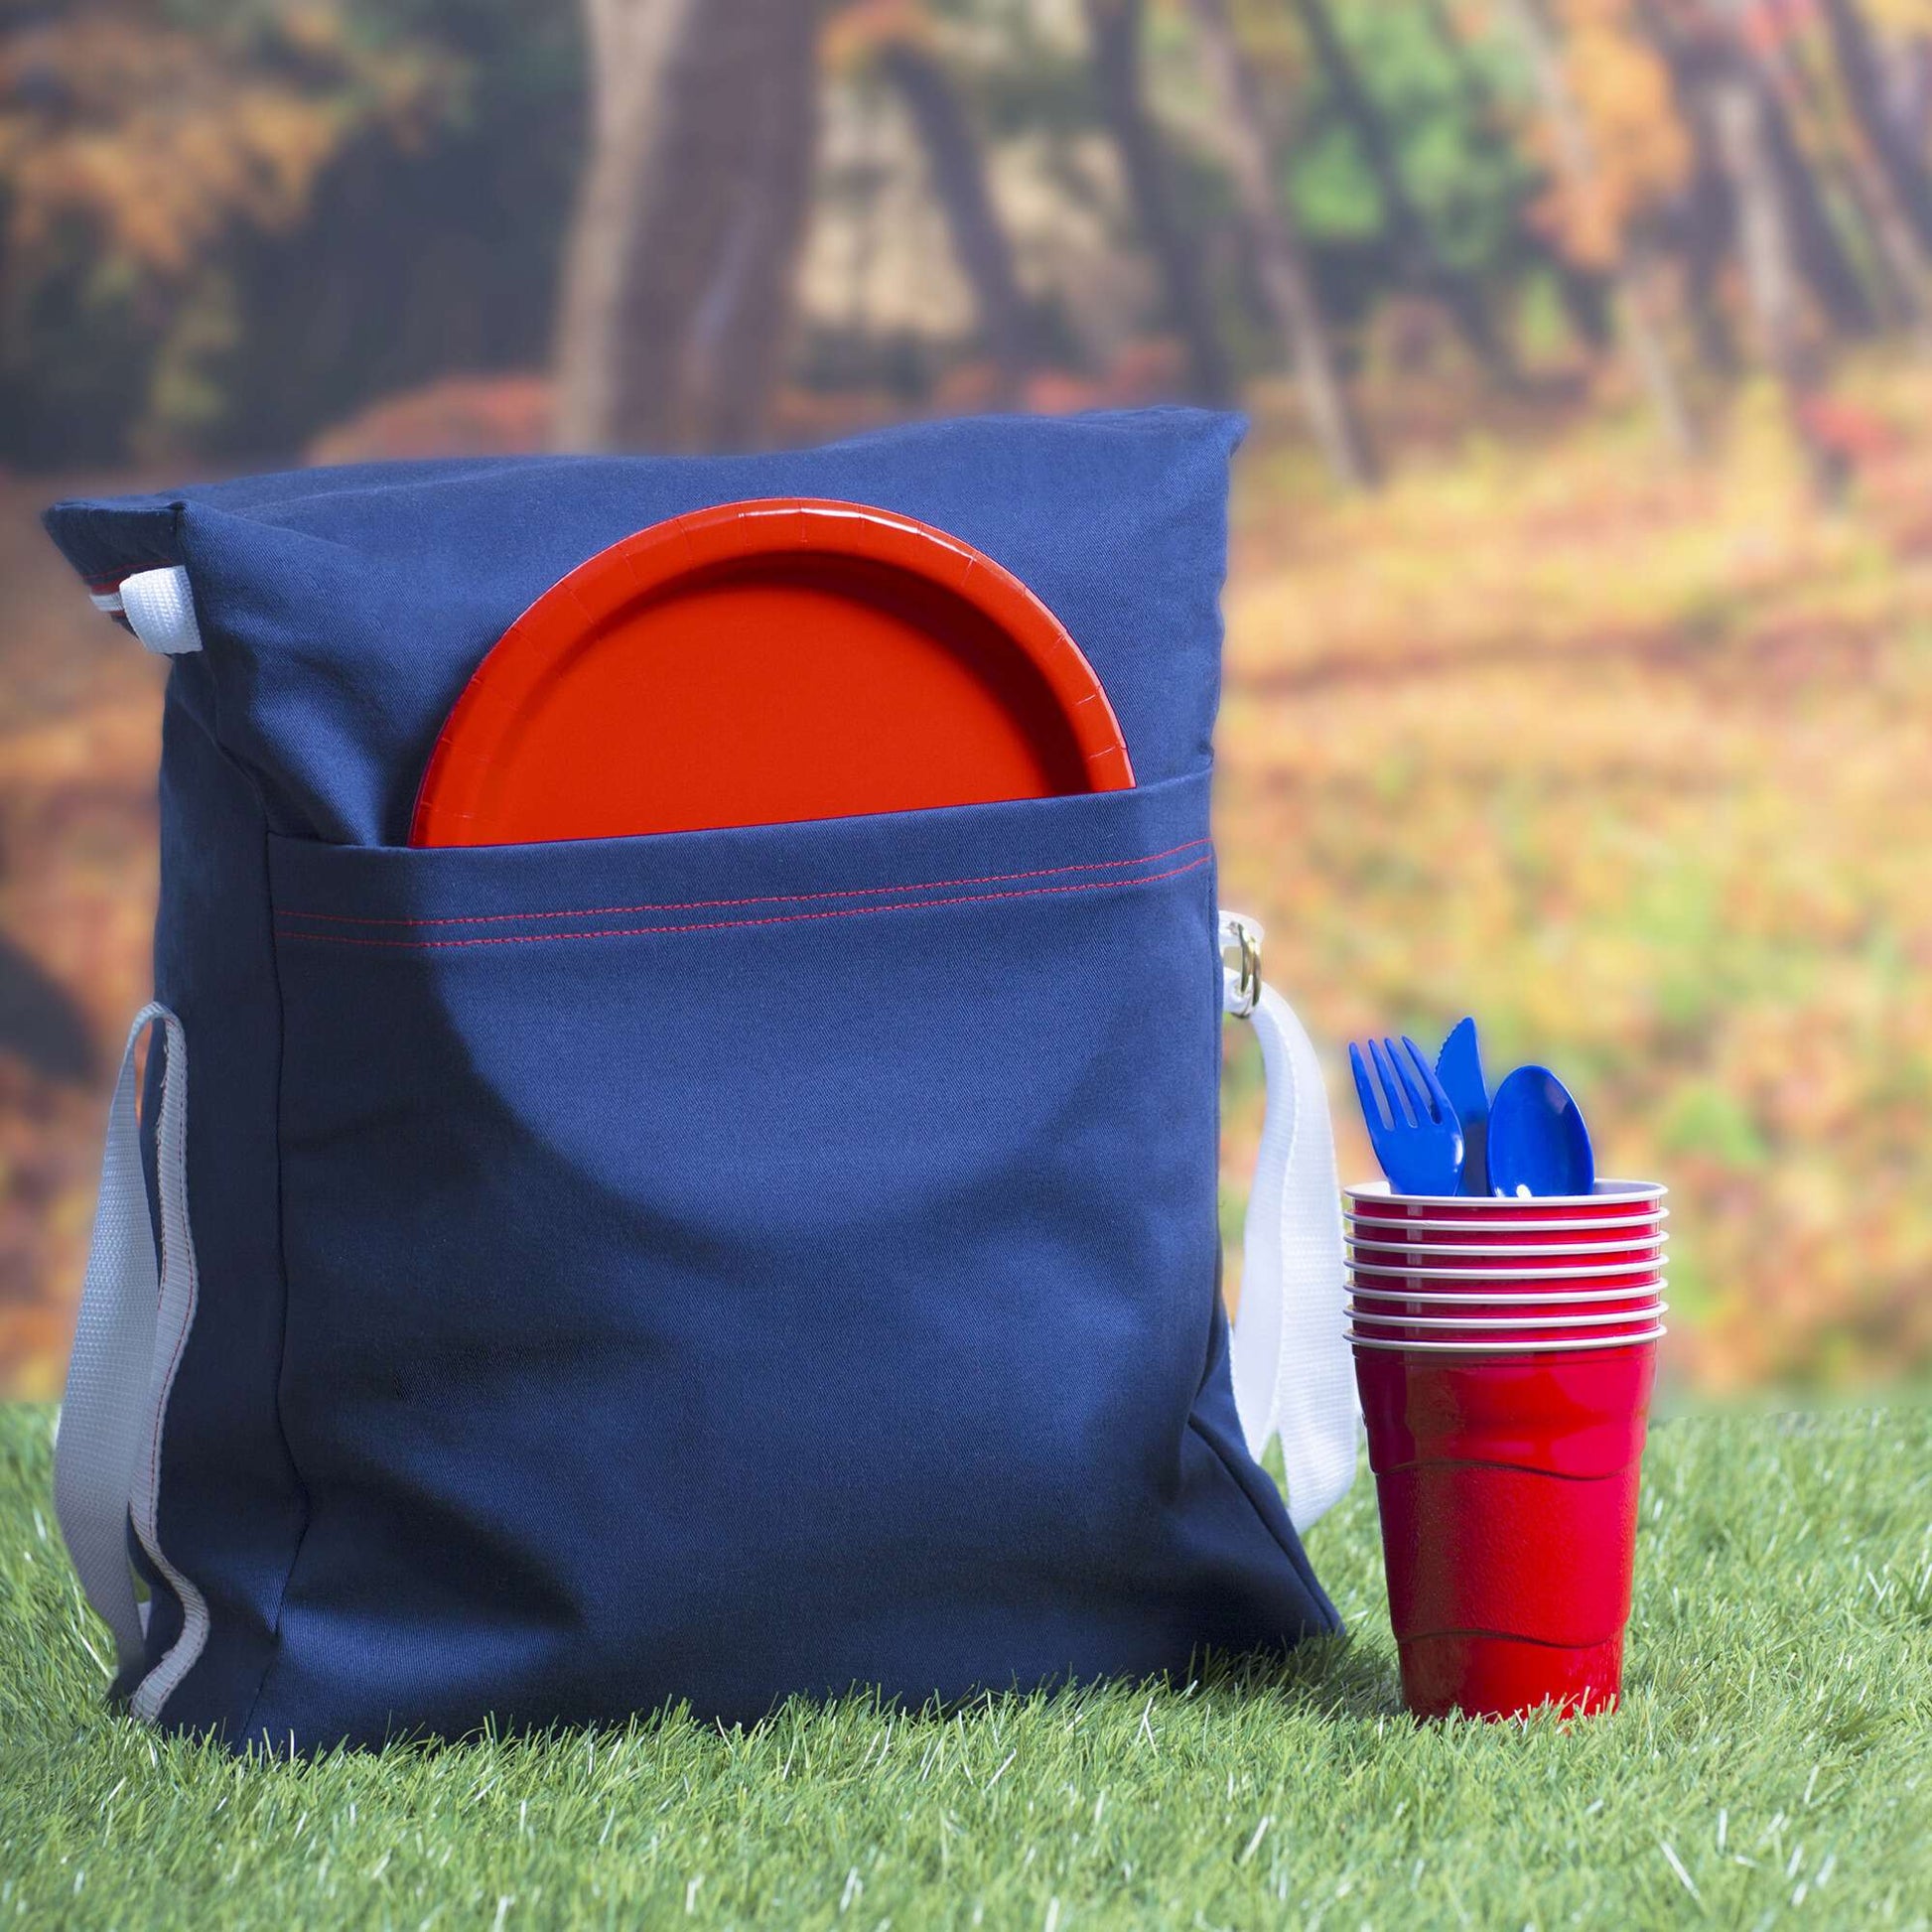 Free Coats & Clark Sewing Tailgate / Picnic Tote Pattern